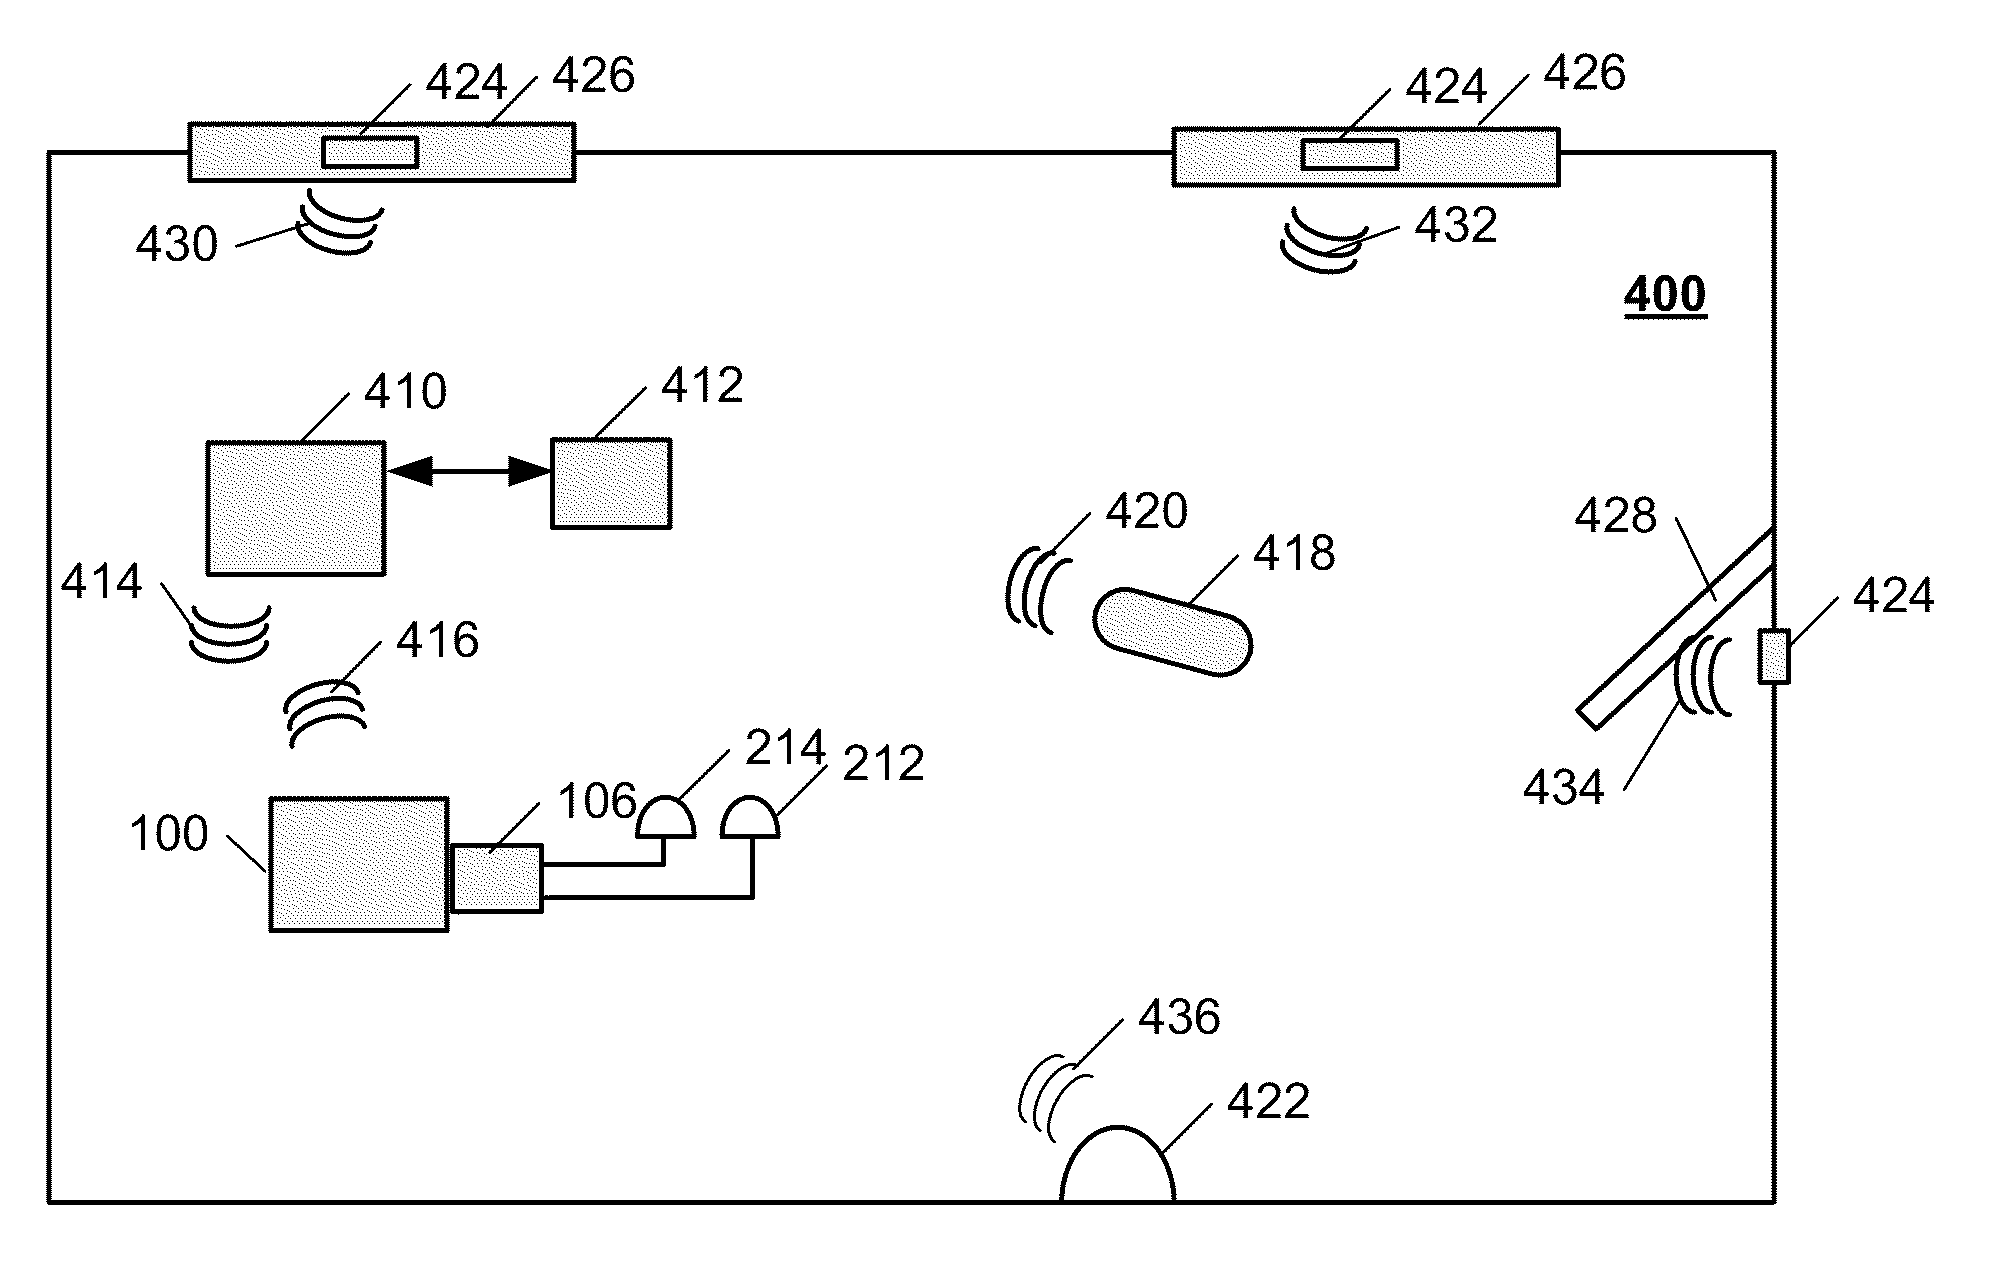 Systems and methods for an environmental control system including a motorized vent covering